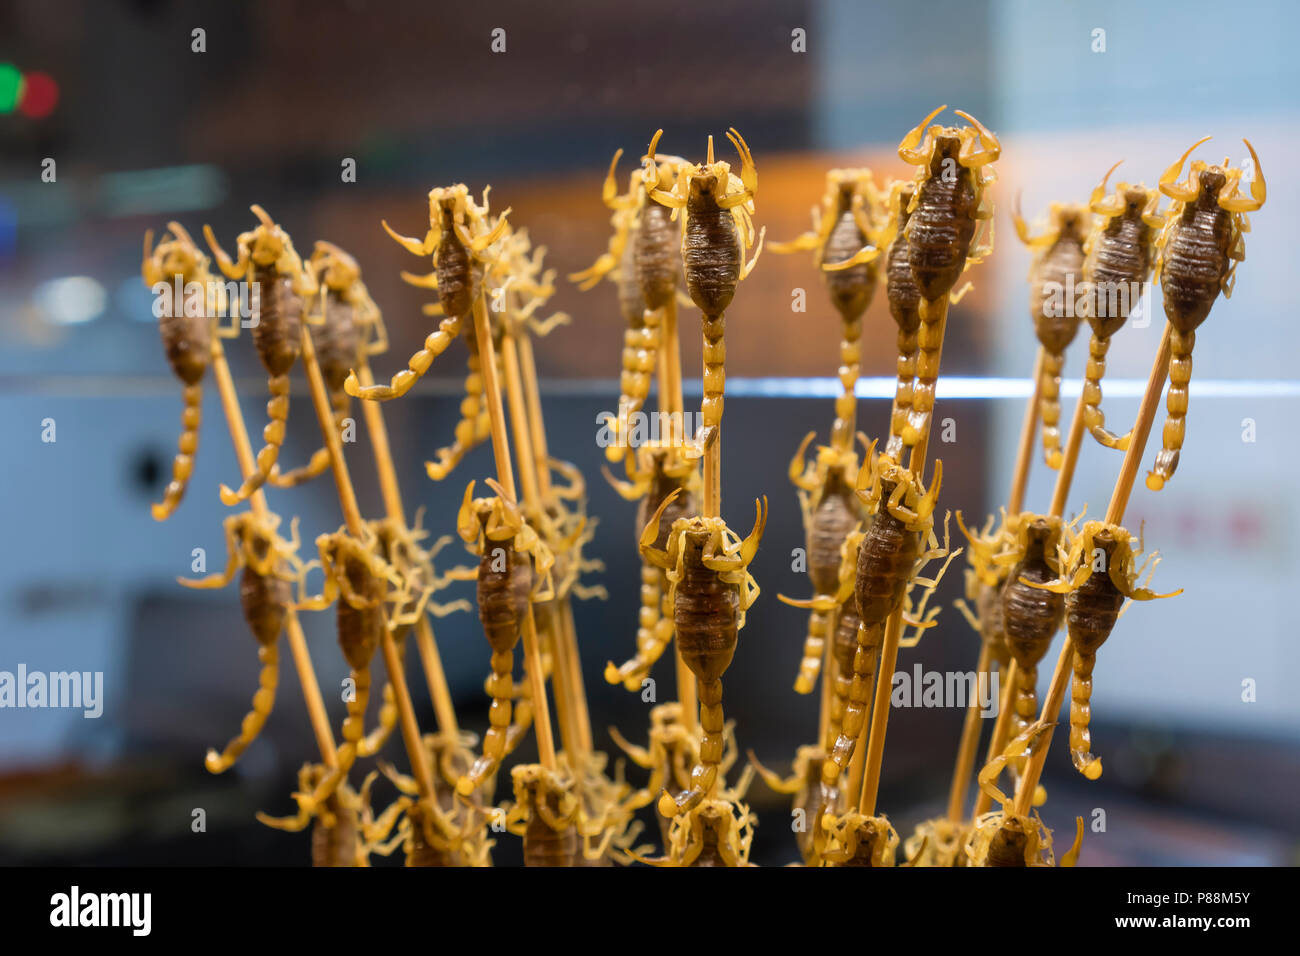 Fried scorpion for sale at a food stall in China Stock Photo